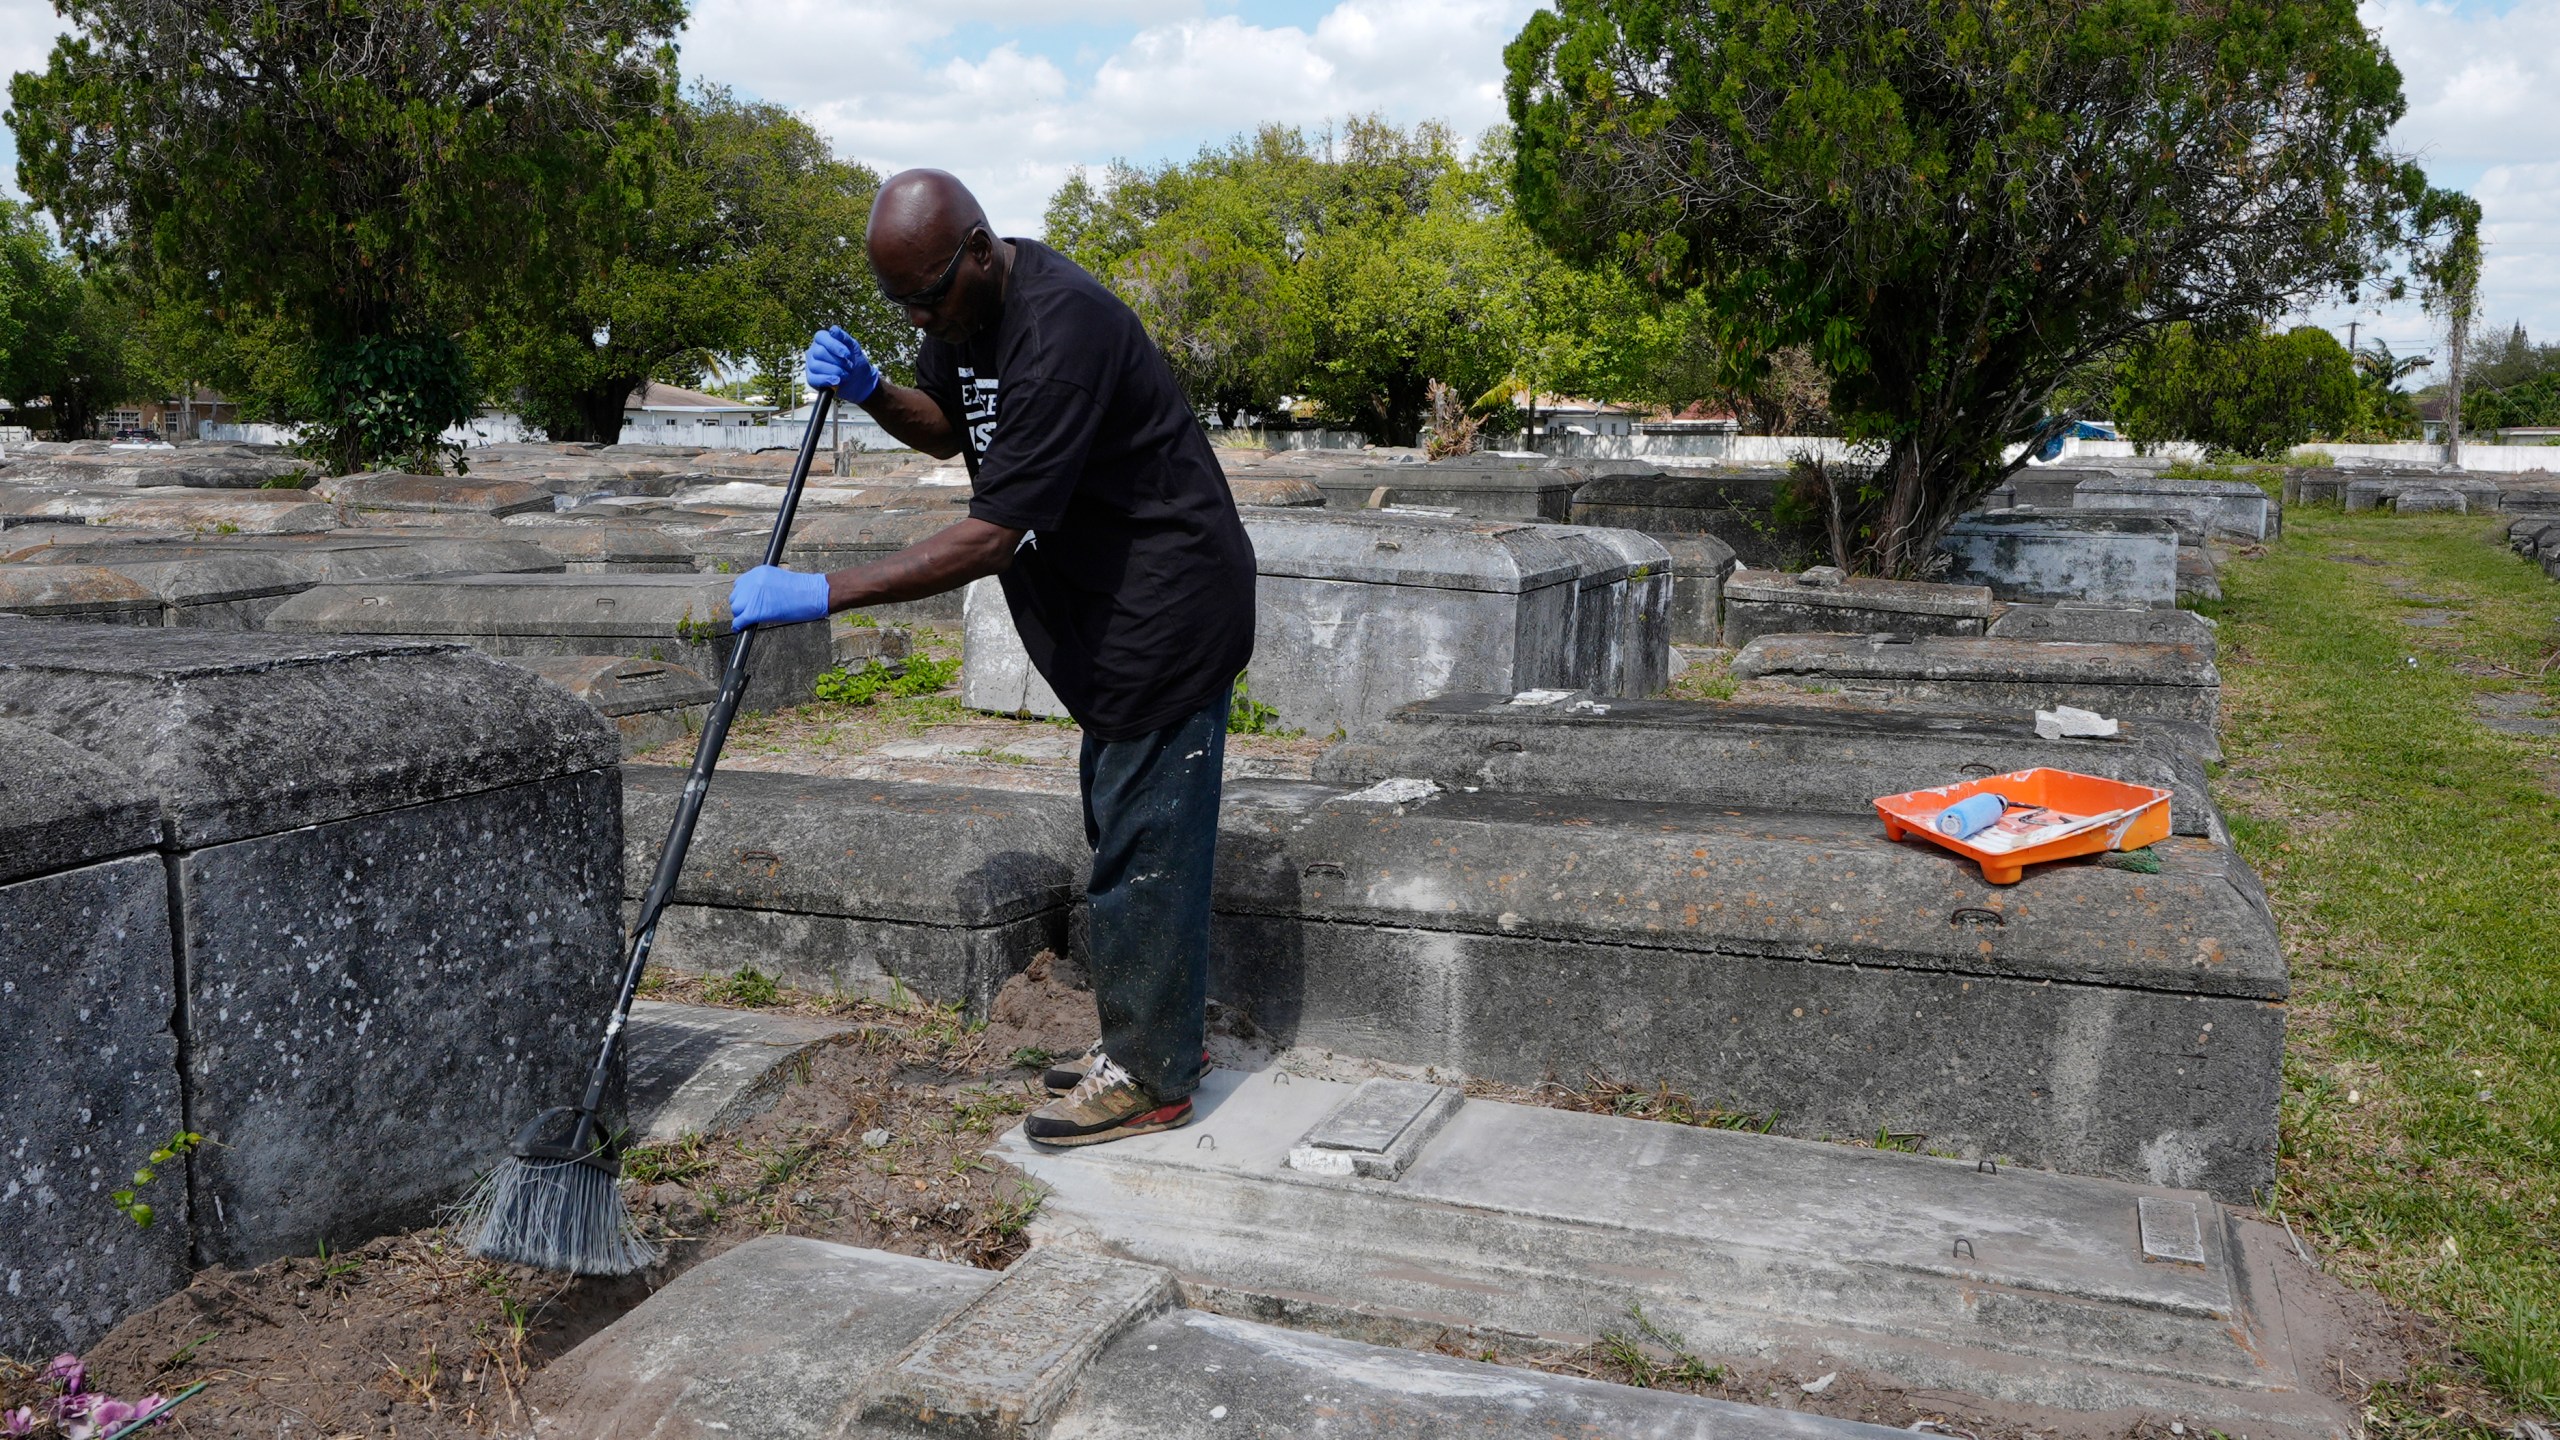 Frank Wooden sweeps the graves of a local family at the Lincoln Memorial Park Cemetery, Monday, Feb. 26, 2024, in the Brownsville neighborhood of Miami. Wooden became the caretaker after his brother, Jessie, purchased the historically segregated Black cemetery where their mother is buried. “When we got here it looked like a jungle,” Frank Wooden said. “Some people had to jump the fence to get in to see their loved one.” (AP Photo/Marta Lavandier)